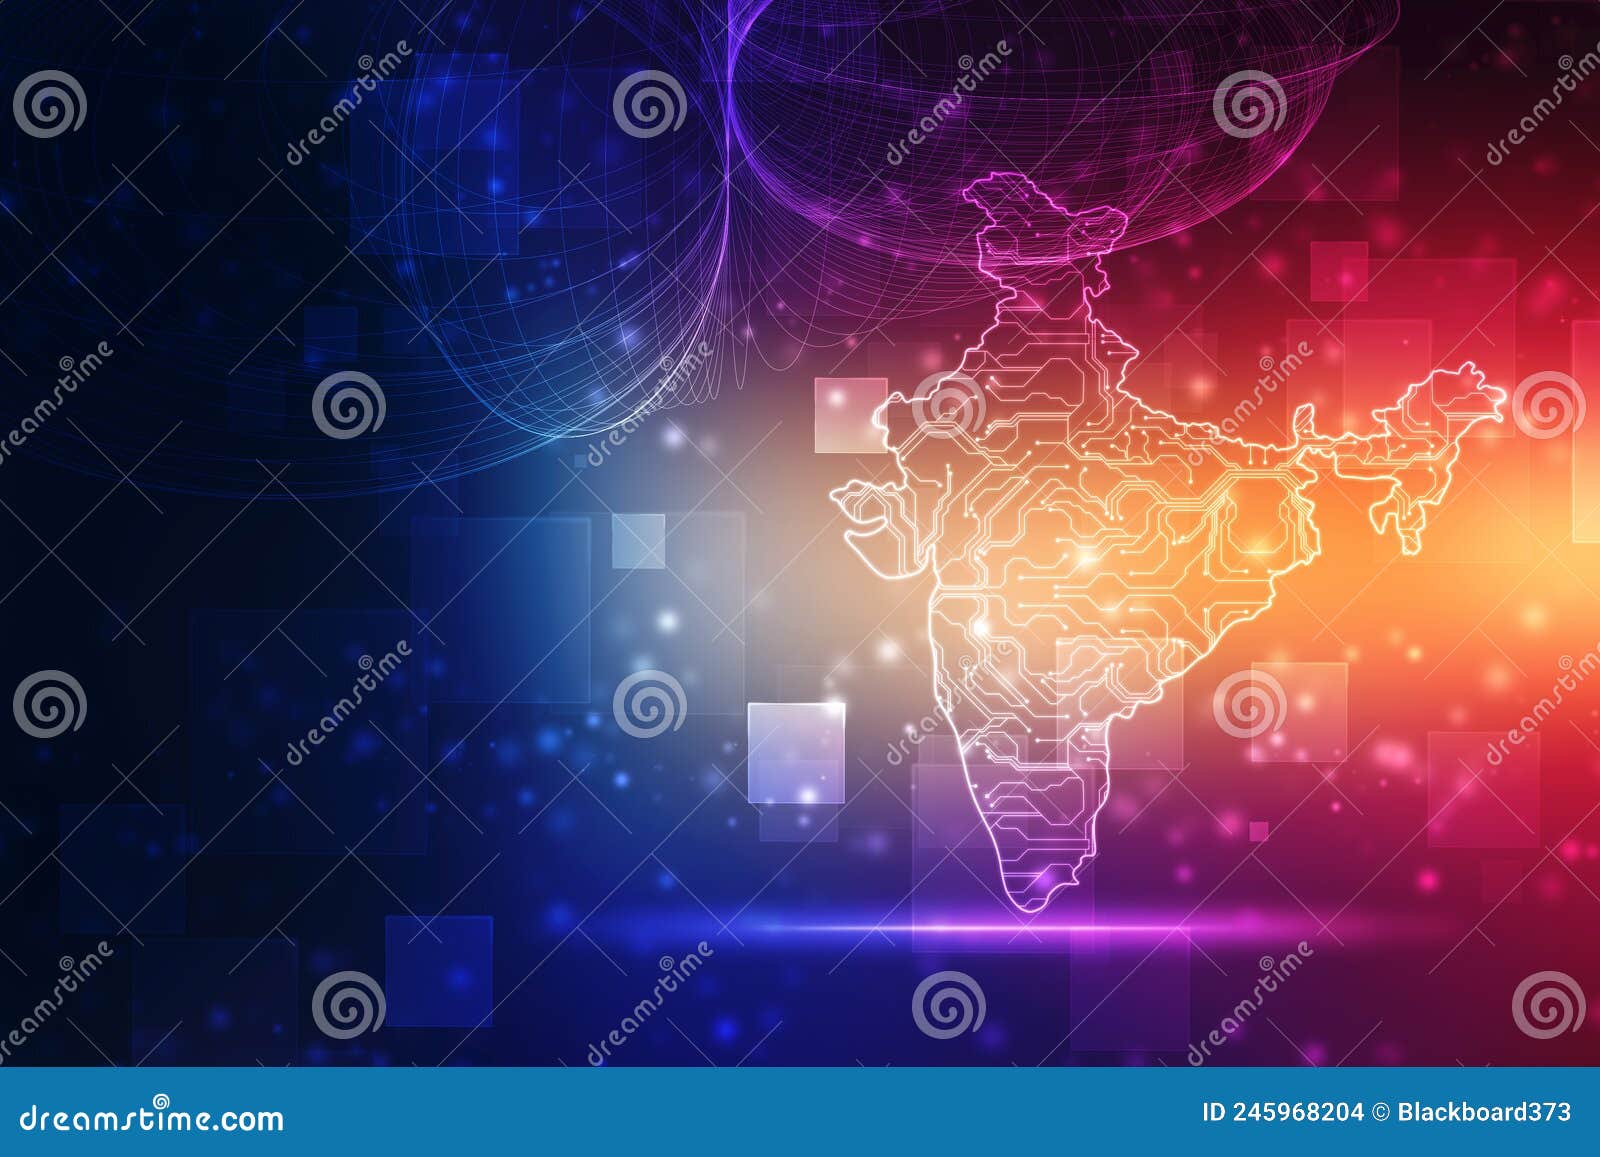 Digital India Concept, India Map with Circuit Lines on Technology Background  Stock Illustration - Illustration of connection, information: 245968204